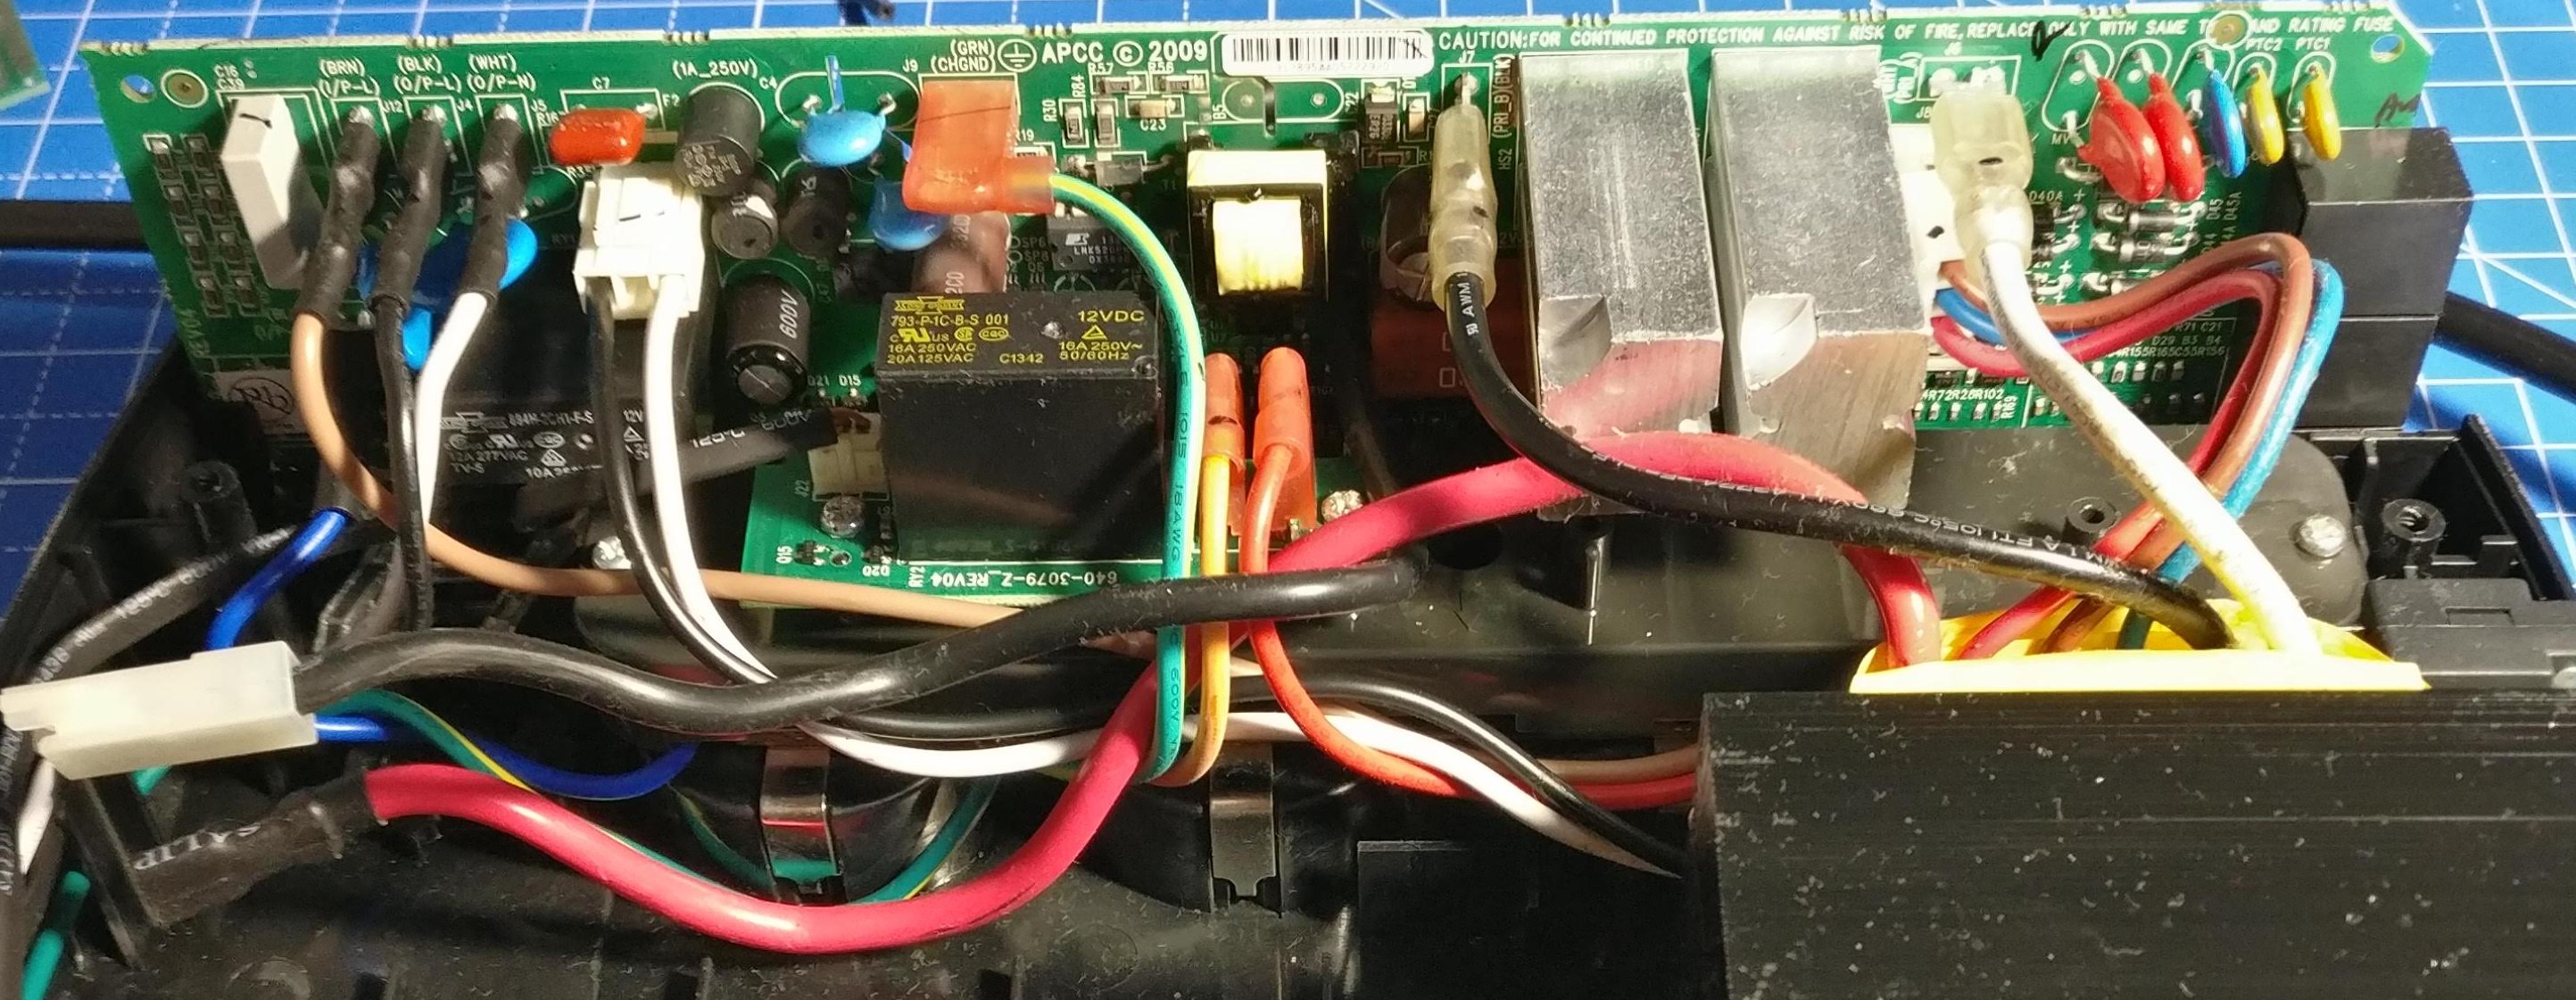 Picture showing the connections on the main circuit board of the UPS